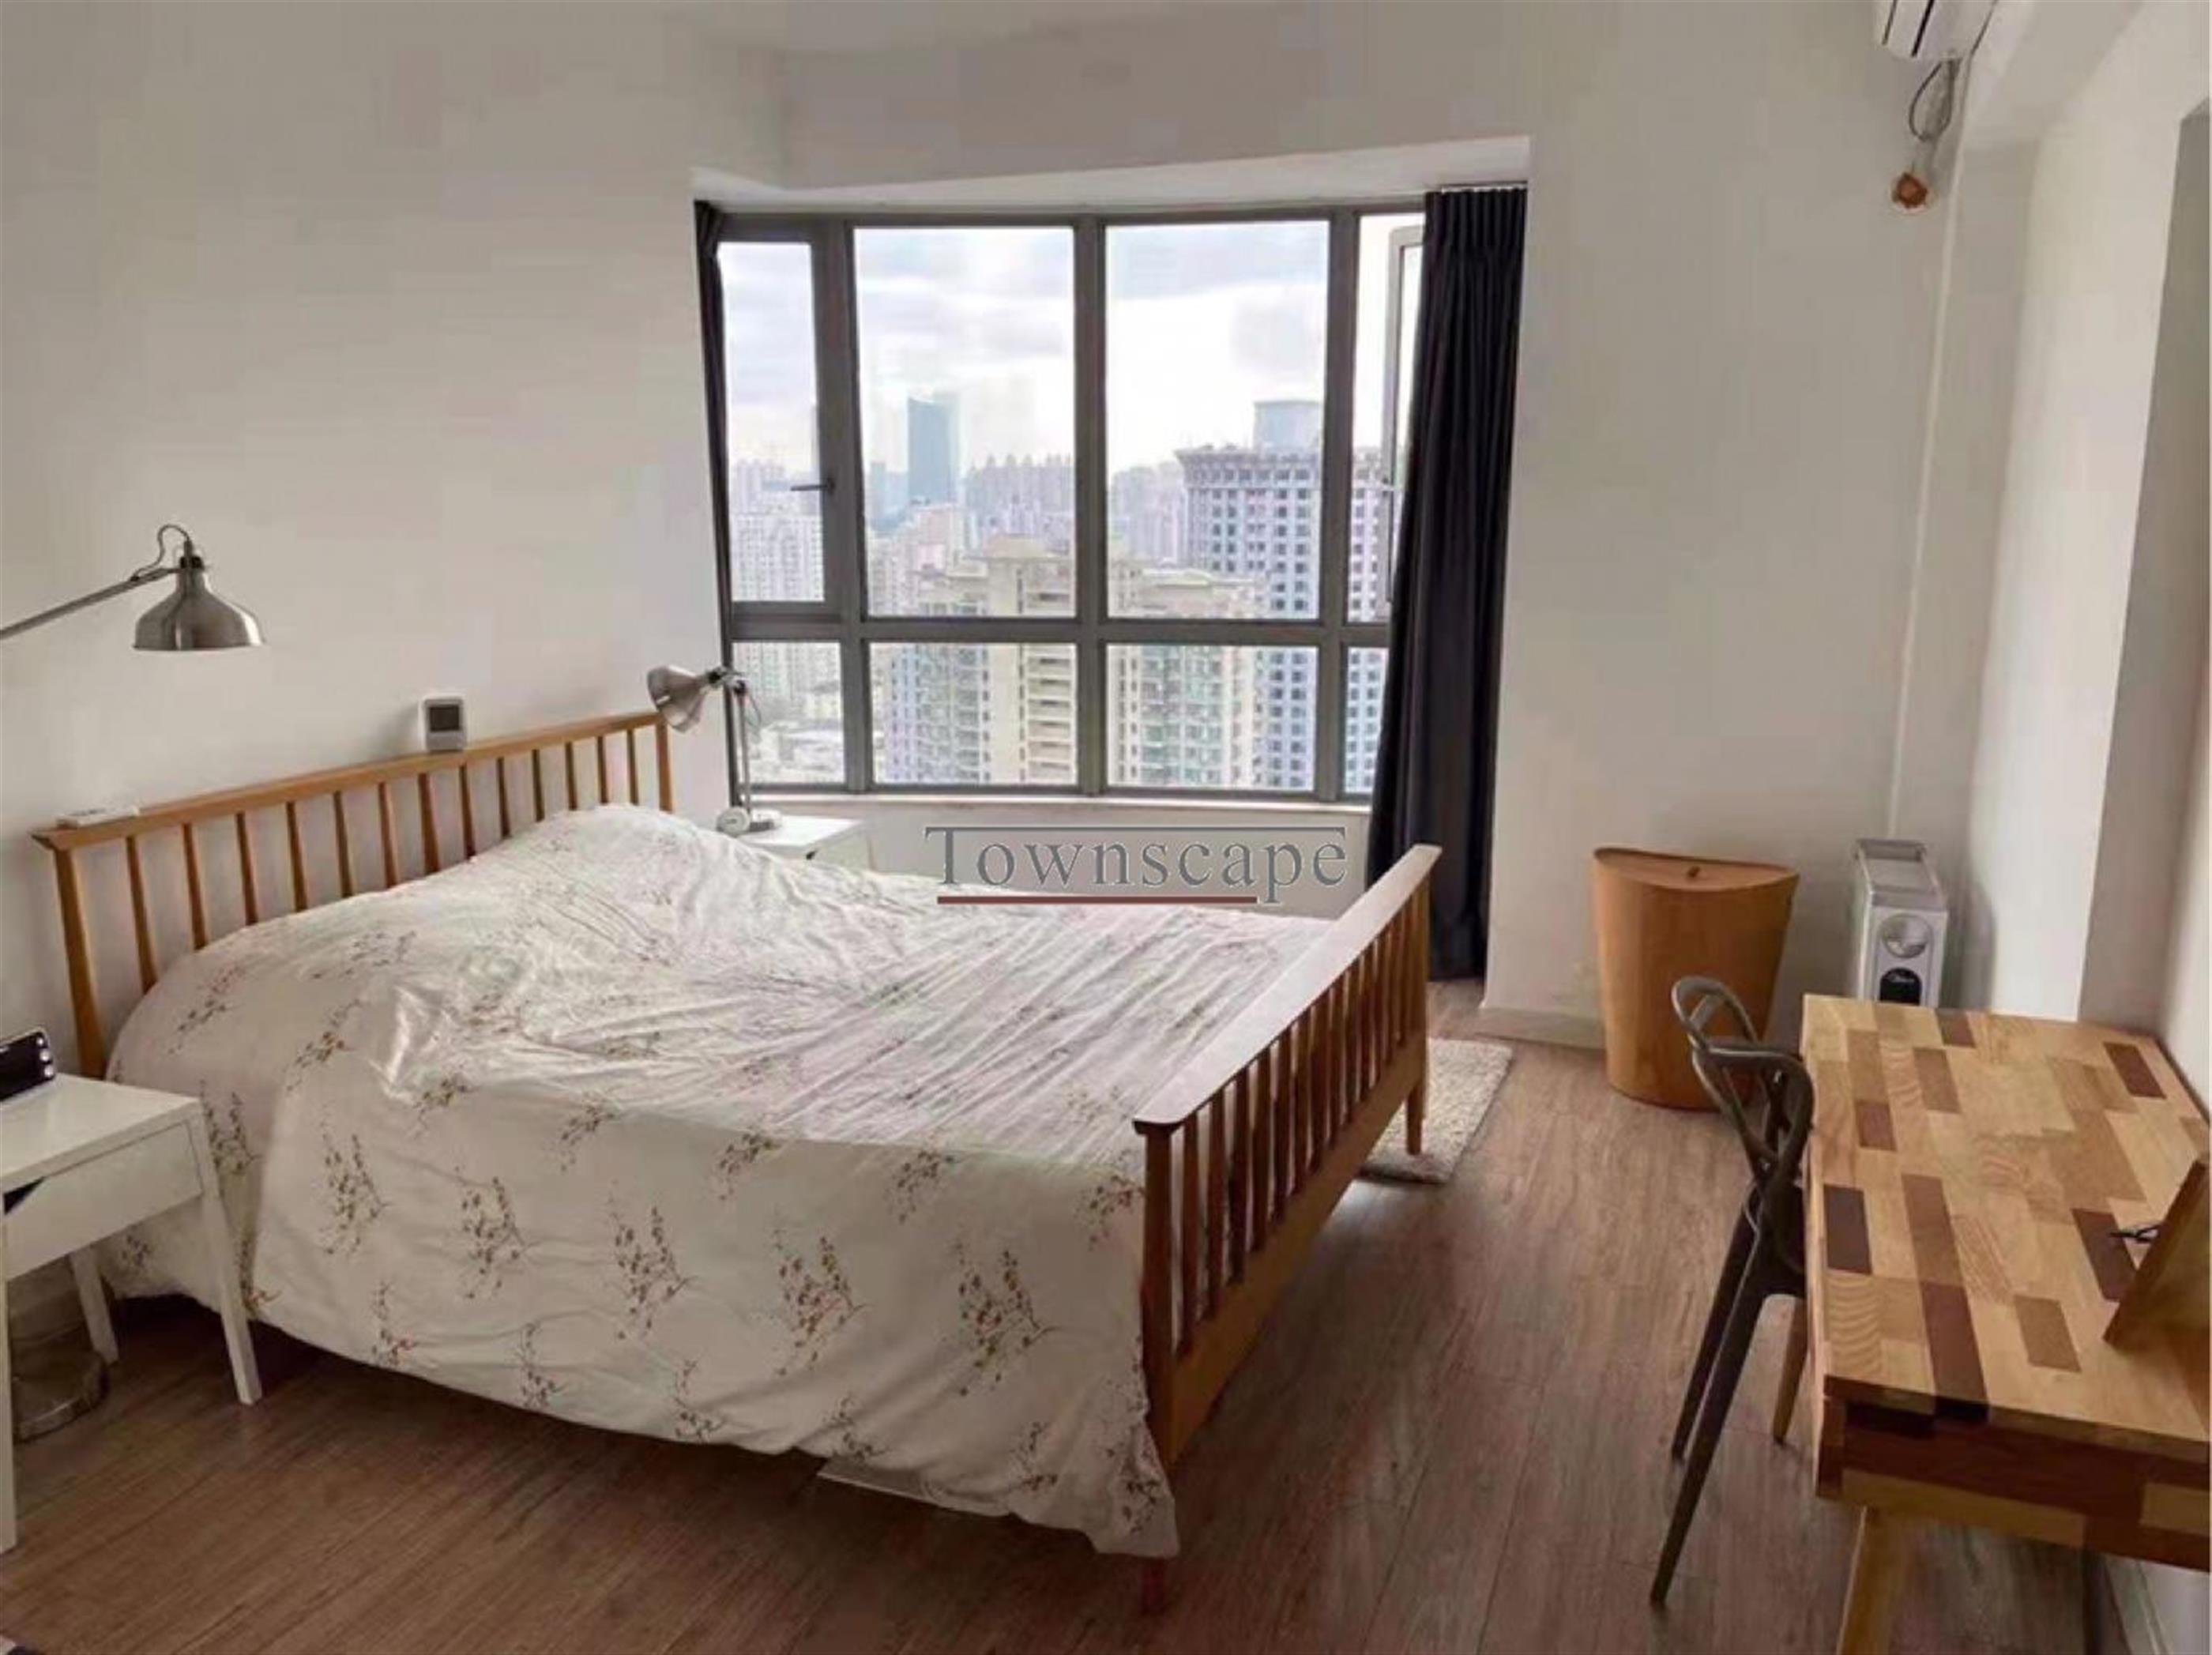 Sunny bedroom Fabulous Spacious Le Cite 3BR Apt in the Clouds Nr LN 1/9/11 for Rent in Shanghai’s Xujiahui